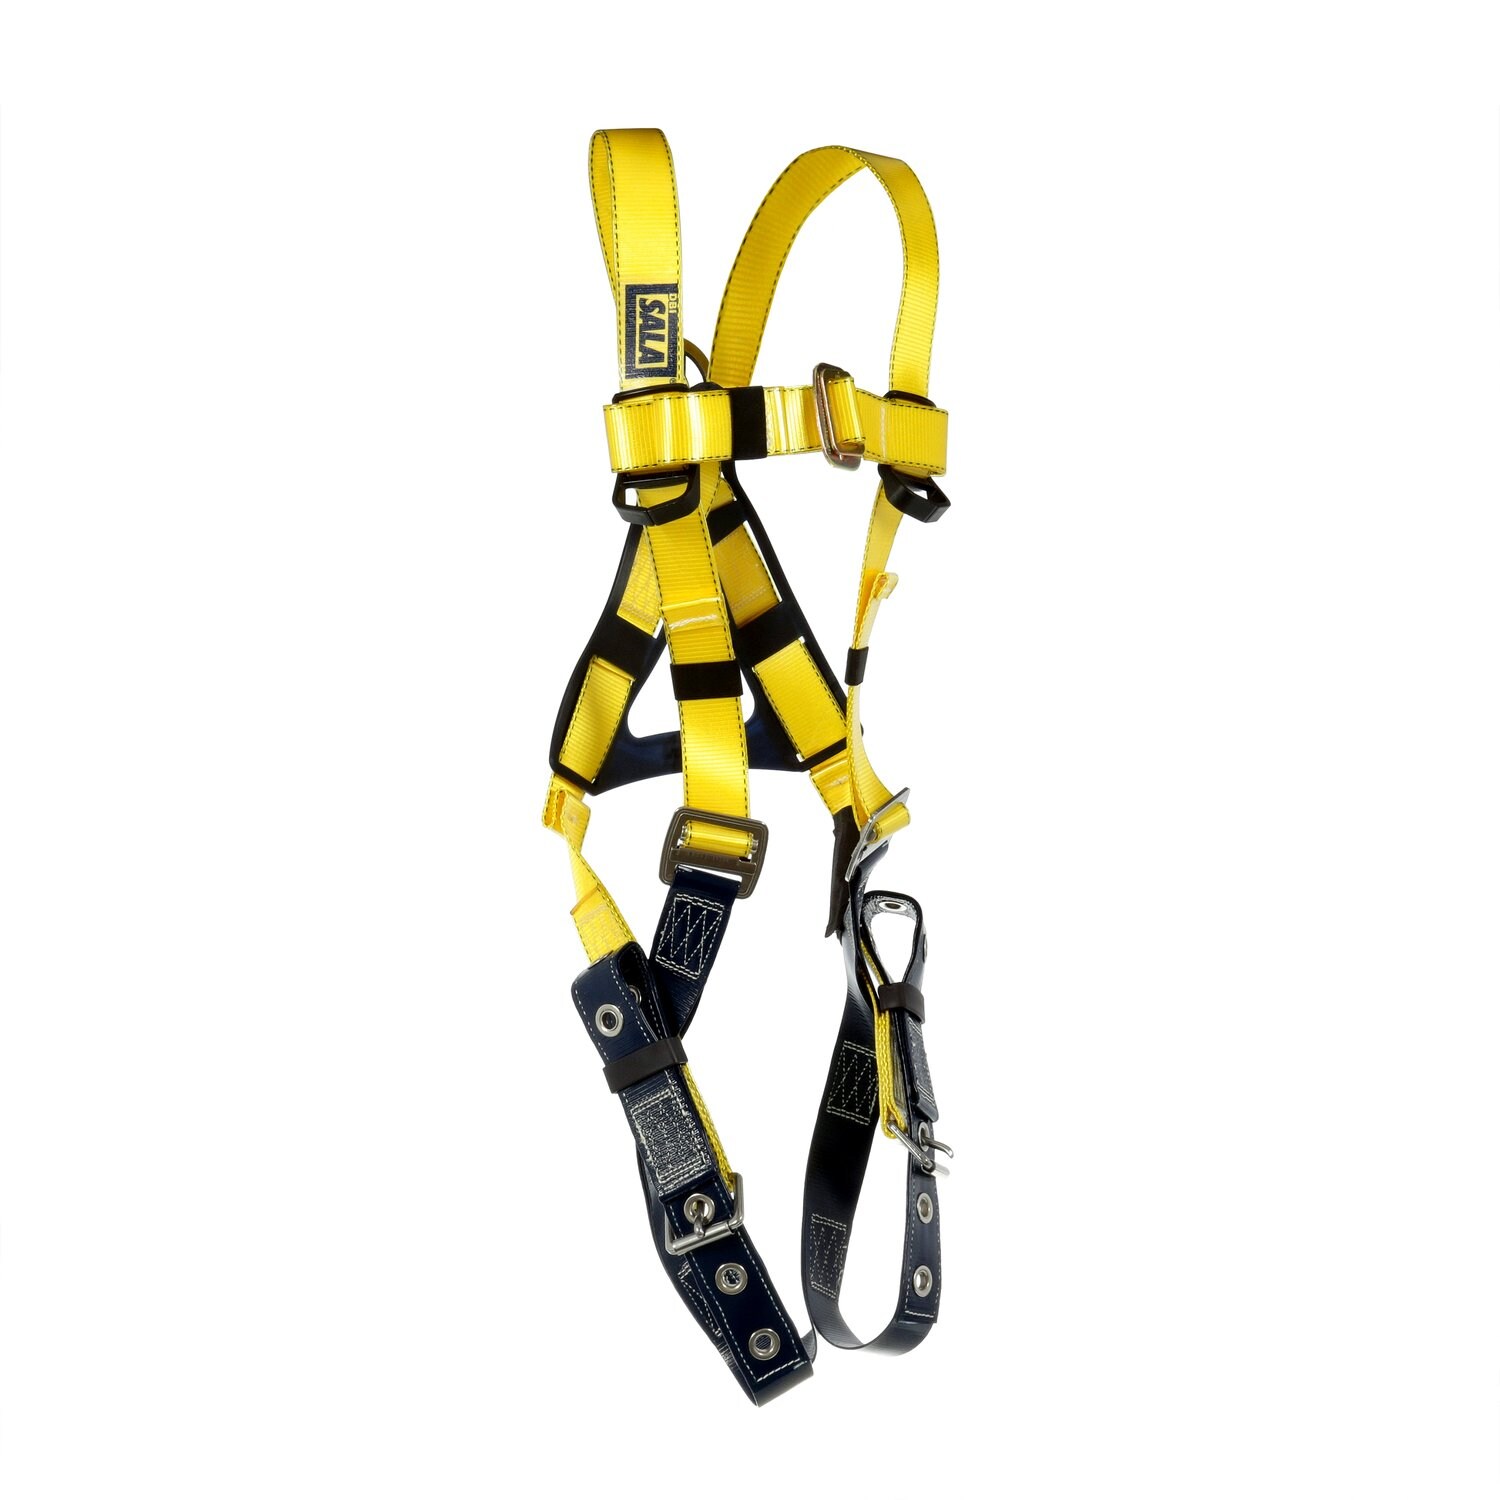 7012816465 - 3M DBI-SALA Delta Vest Safety Harness with SRL Connector 1114110, Stainless Steel Hardware, X-Large